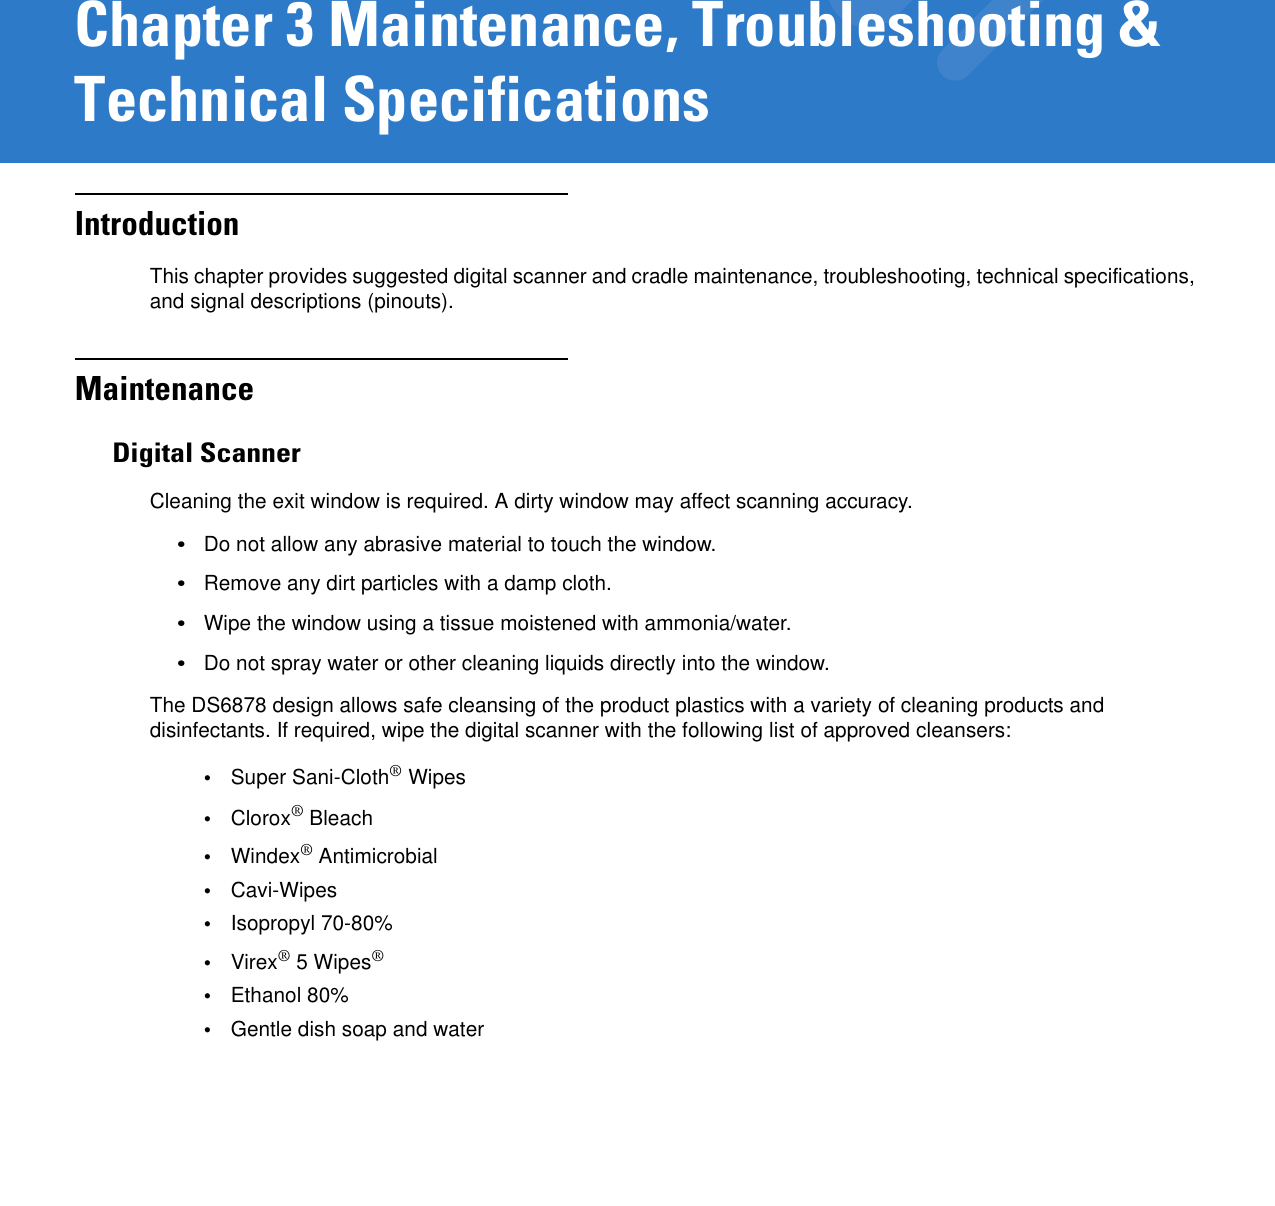 Chapter 3 Maintenance, Troubleshooting &amp; Technical SpecificationsIntroductionThis chapter provides suggested digital scanner and cradle maintenance, troubleshooting, technical specifications, and signal descriptions (pinouts).MaintenanceDigital ScannerCleaning the exit window is required. A dirty window may affect scanning accuracy.•Do not allow any abrasive material to touch the window.•Remove any dirt particles with a damp cloth.•Wipe the window using a tissue moistened with ammonia/water.•Do not spray water or other cleaning liquids directly into the window.The DS6878 design allows safe cleansing of the product plastics with a variety of cleaning products and disinfectants. If required, wipe the digital scanner with the following list of approved cleansers:•Super Sani-Cloth® Wipes•Clorox® Bleach•Windex® Antimicrobial•Cavi-Wipes•Isopropyl 70-80%•Virex® 5 Wipes®•Ethanol 80%•Gentle dish soap and water